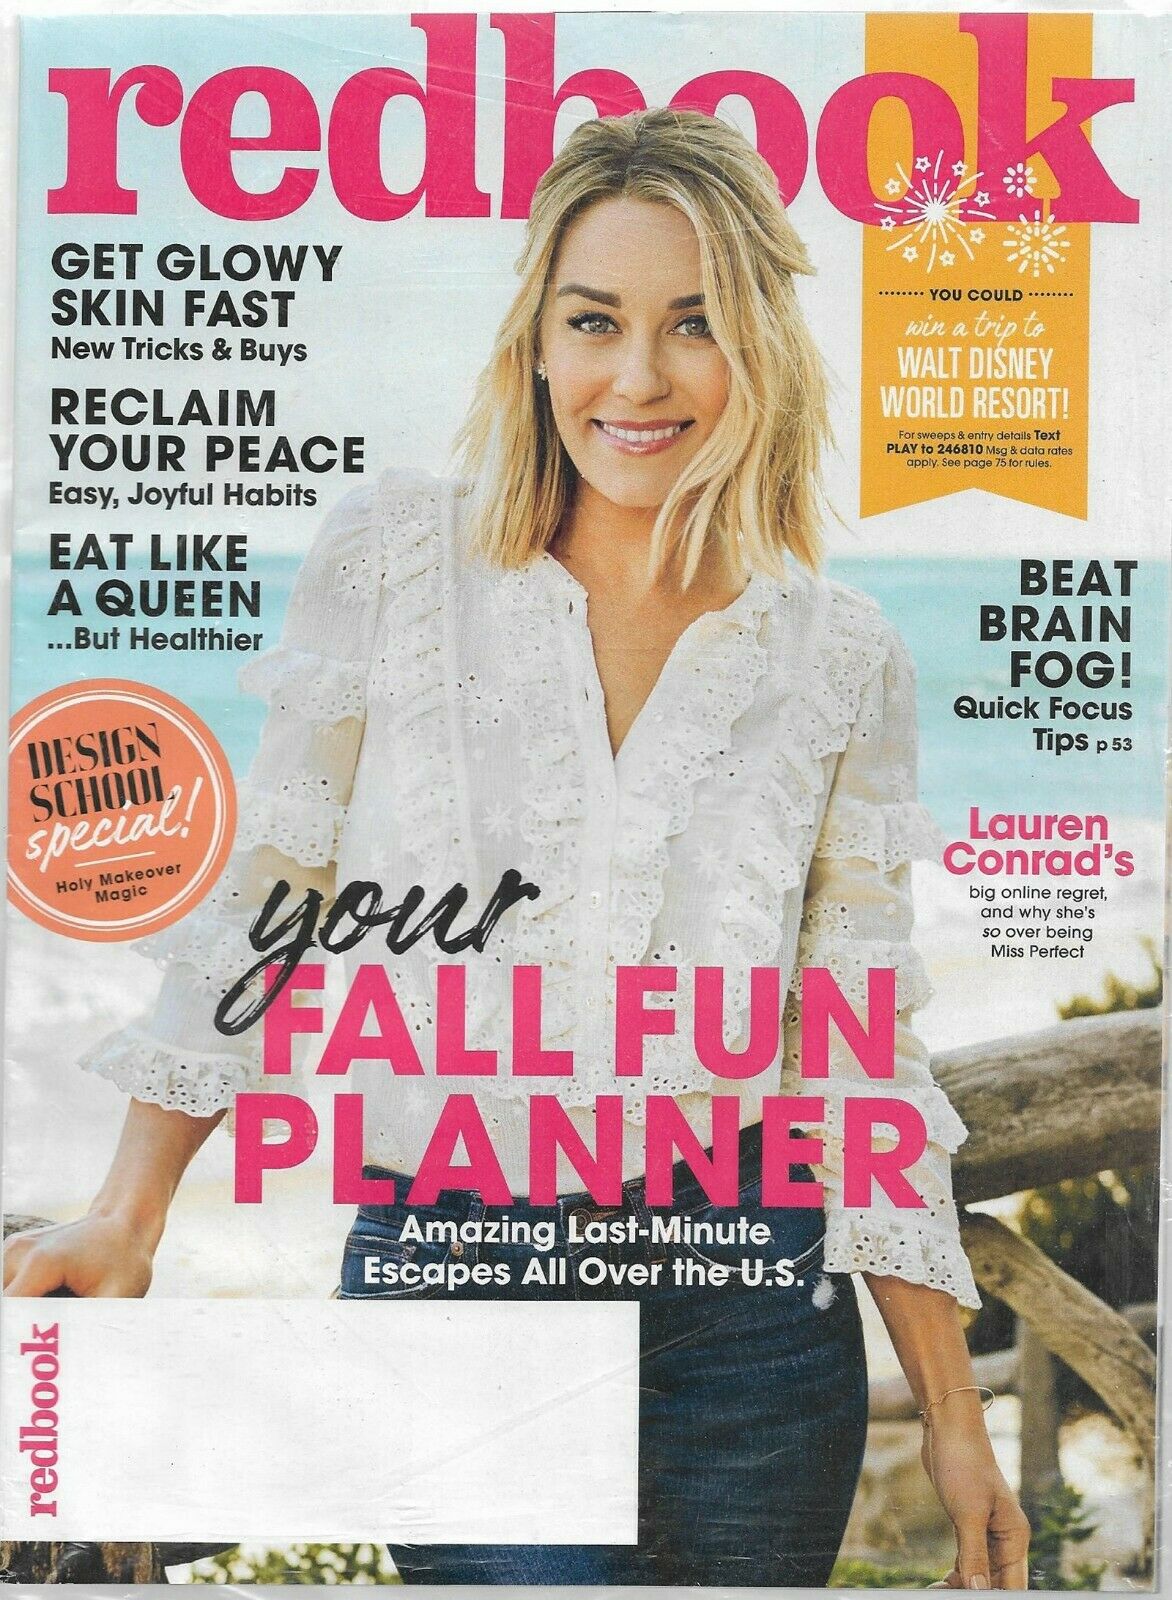 Redbook October 2018 magazine back issue Redbook magizine back copy Redbook October 2018, Redbook is an American womens magazine published by the Hearst Corporation and is part of The Seven Sisters Magazine Group. Lauren Conrad's big online regret, and why she's so over being Miss Perfect.